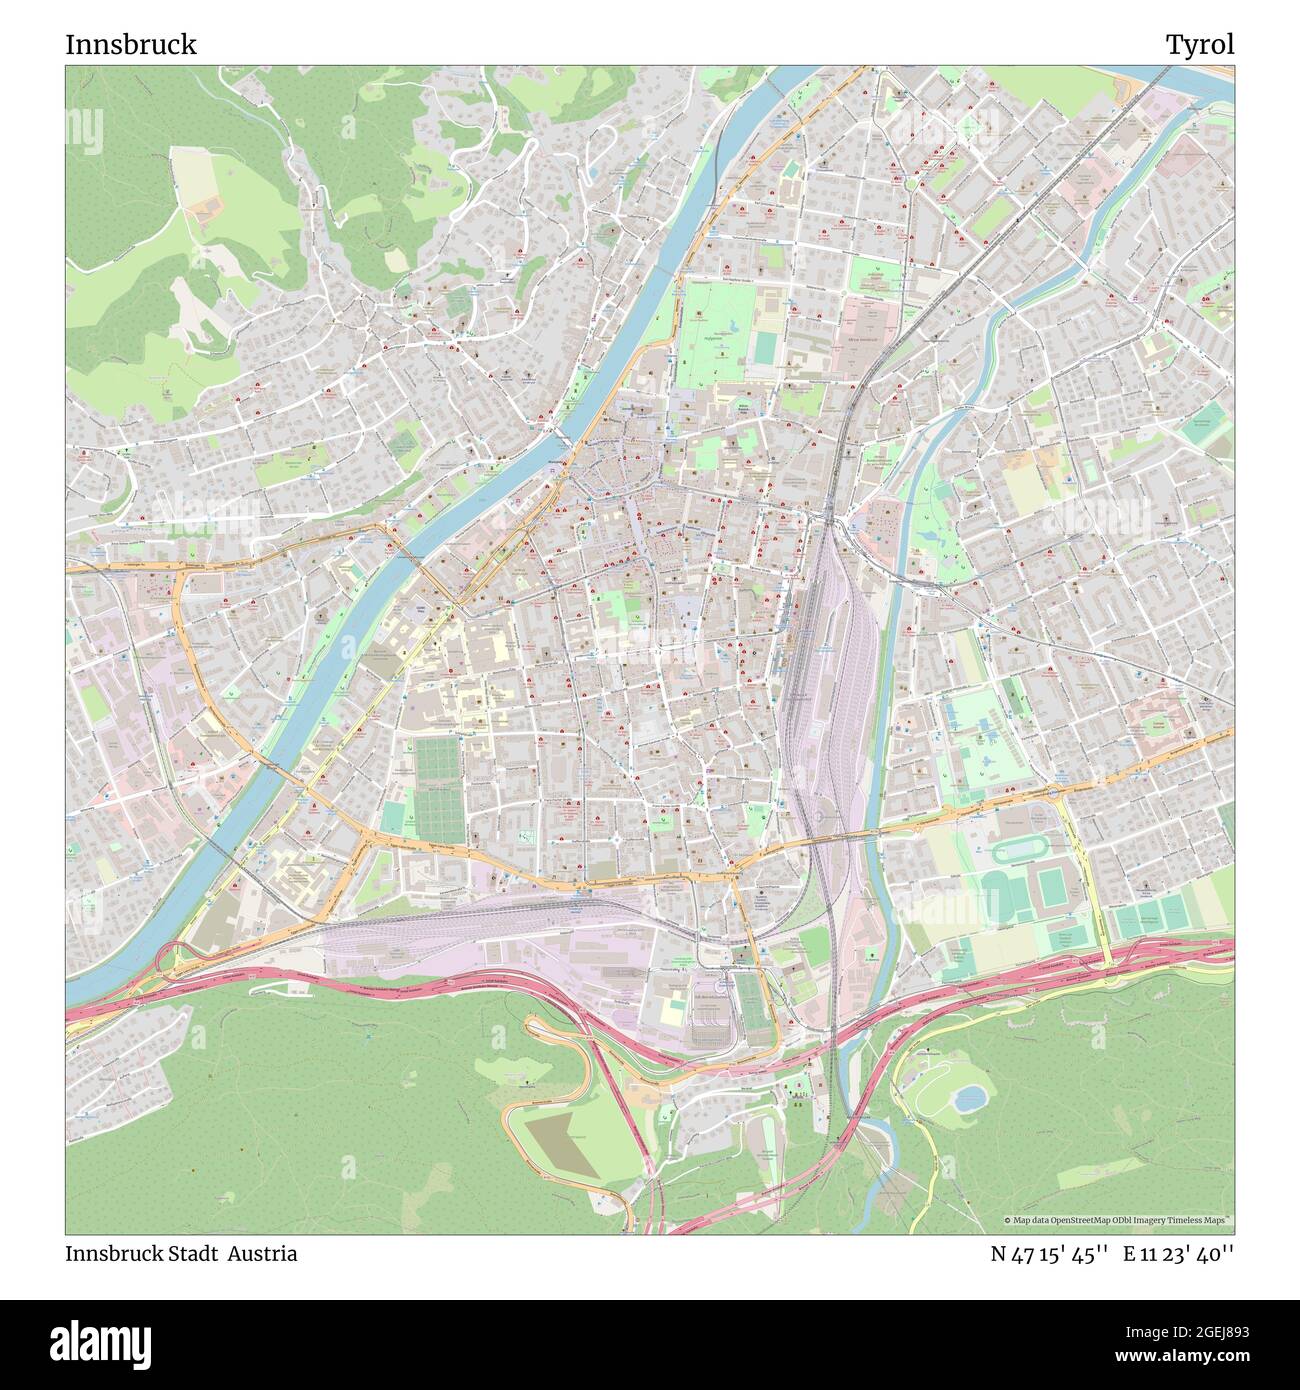 Innsbruck, Innsbruck Stadt, Austria, Tyrol, N 47 15' 45'', E 11 23' 40'', map, Timeless Map published in 2021. Travelers, explorers and adventurers like Florence Nightingale, David Livingstone, Ernest Shackleton, Lewis and Clark and Sherlock Holmes relied on maps to plan travels to the world's most remote corners, Timeless Maps is mapping most locations on the globe, showing the achievement of great dreams Stock Photo